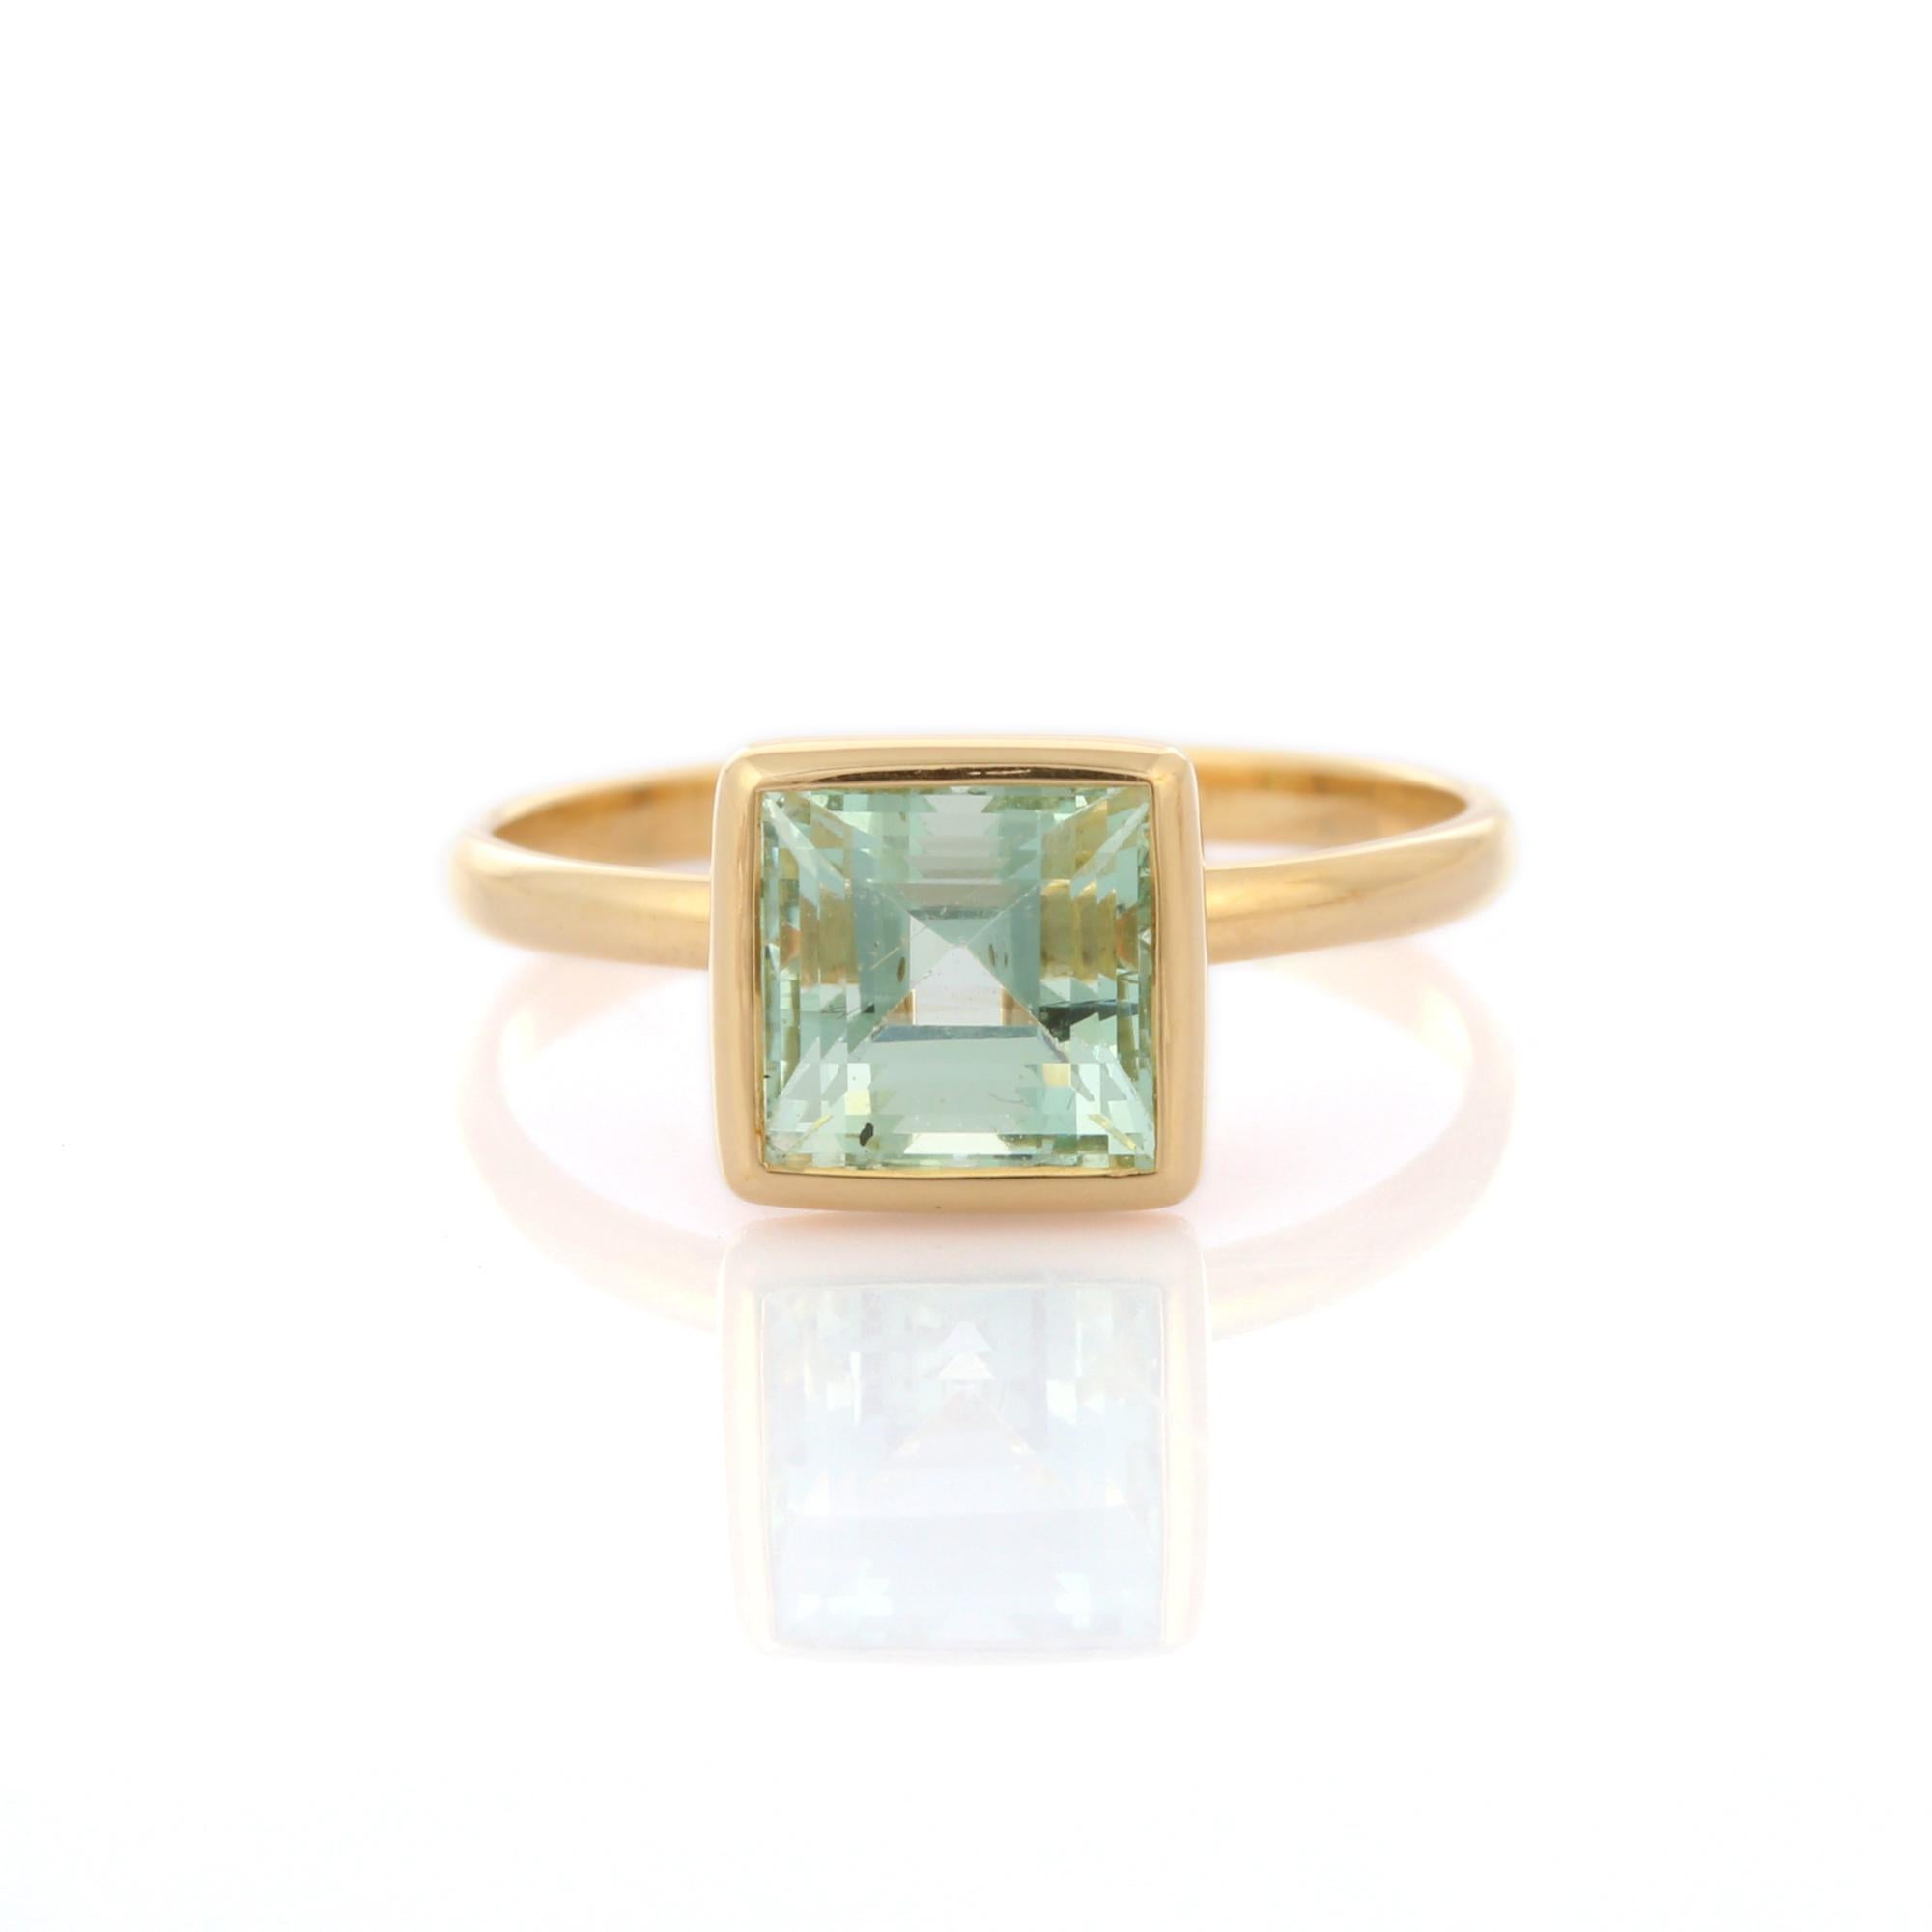 For Sale:  Natural Aquamarine Square Cut Gemstone Ring in 18K Yellow Gold 8